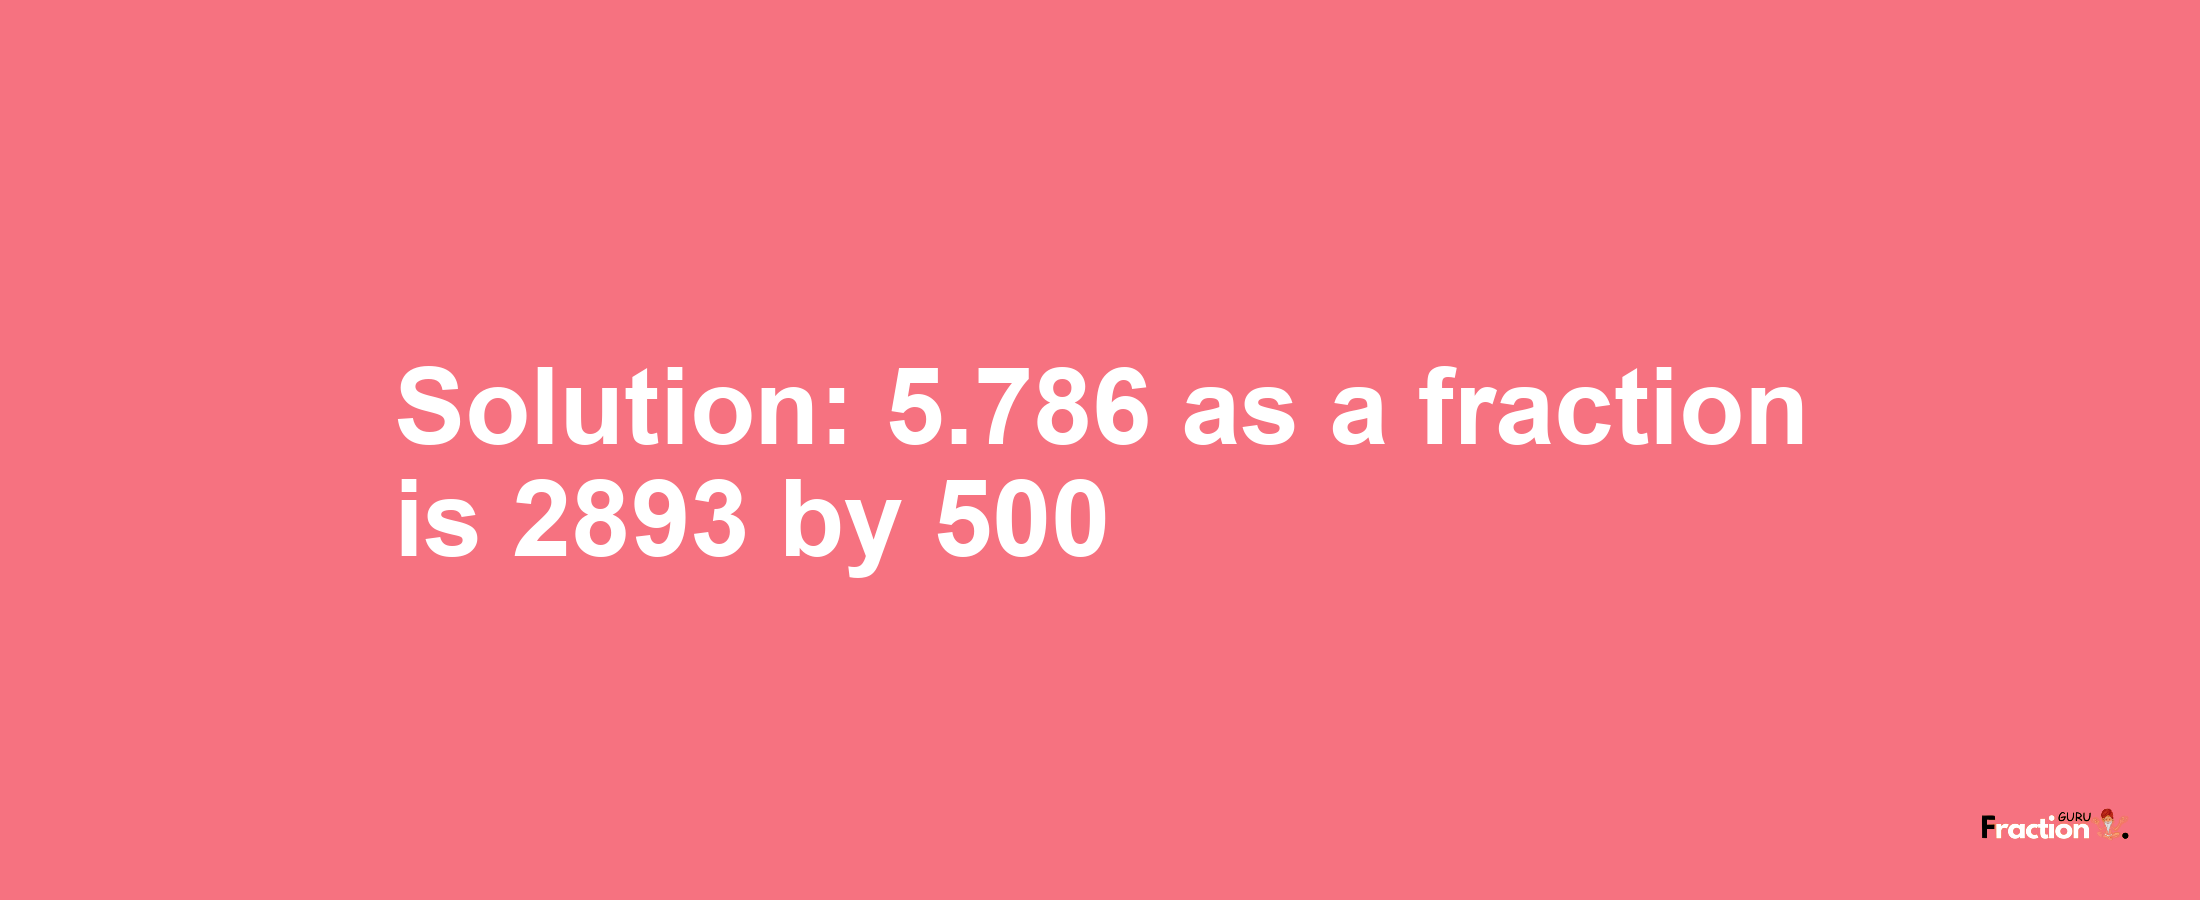 Solution:5.786 as a fraction is 2893/500